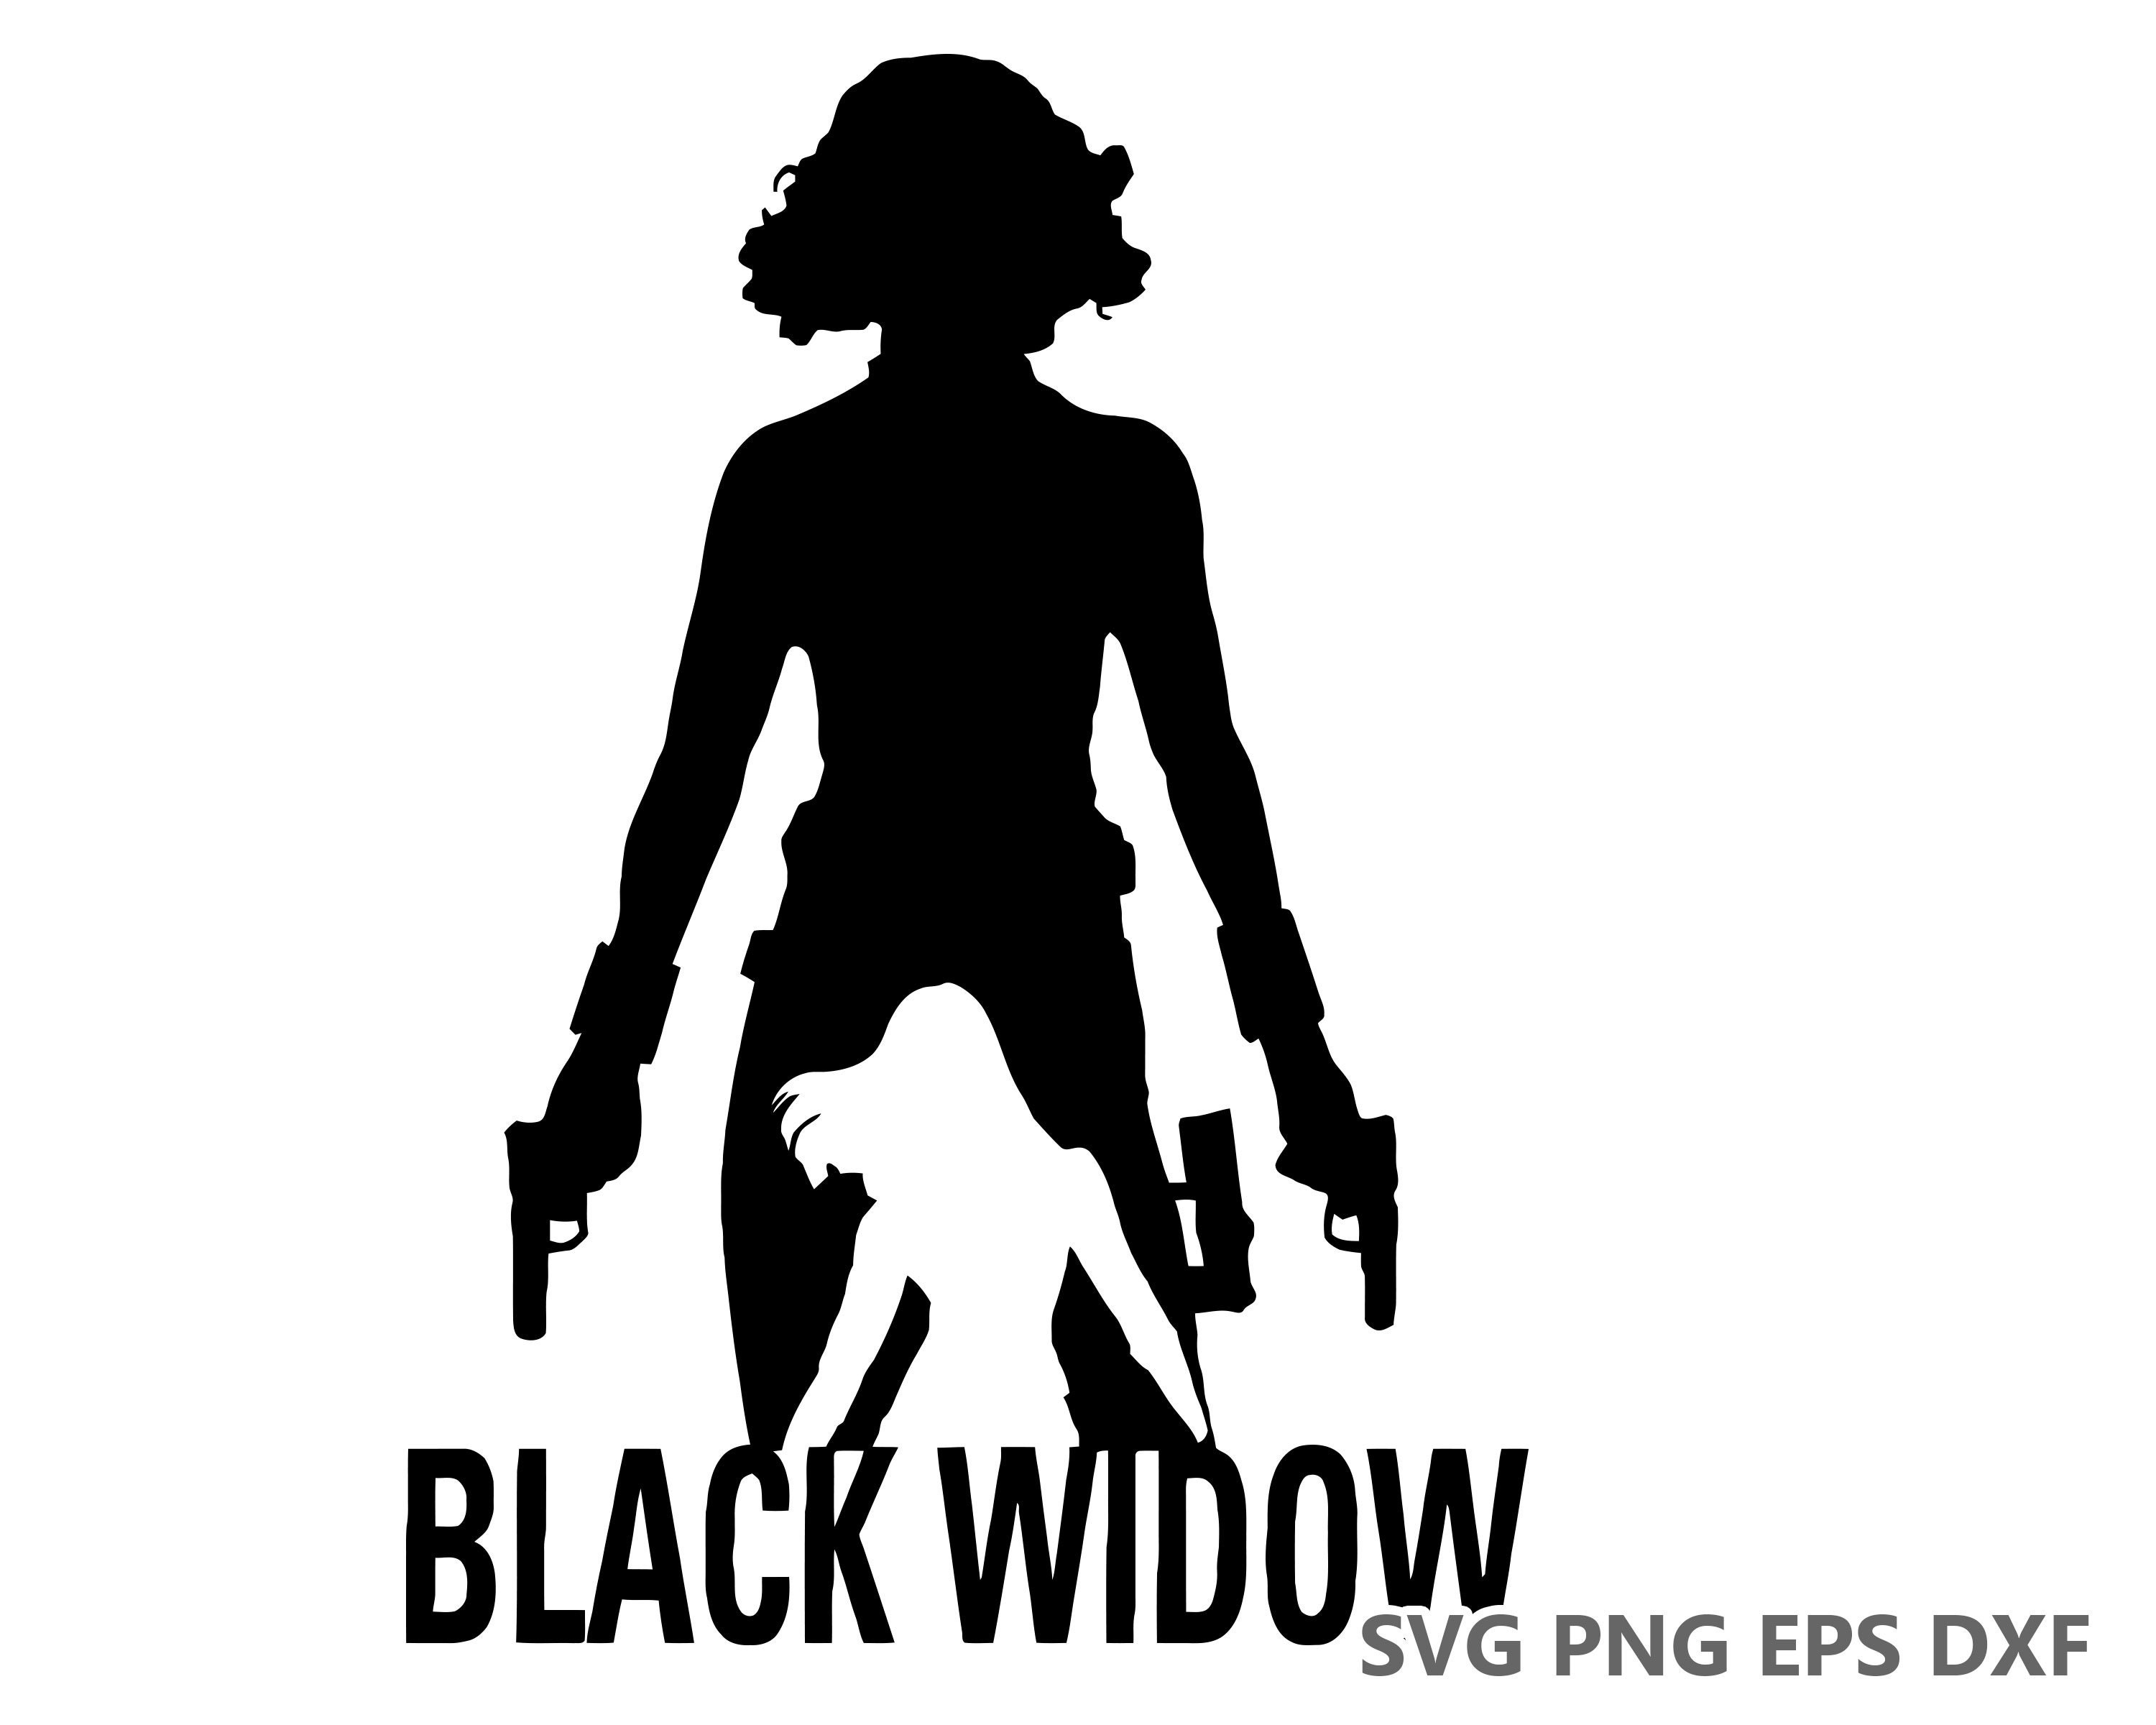 Black Widow Silhouette SVG Cutting Files eps dxf png Cricut | Etsy